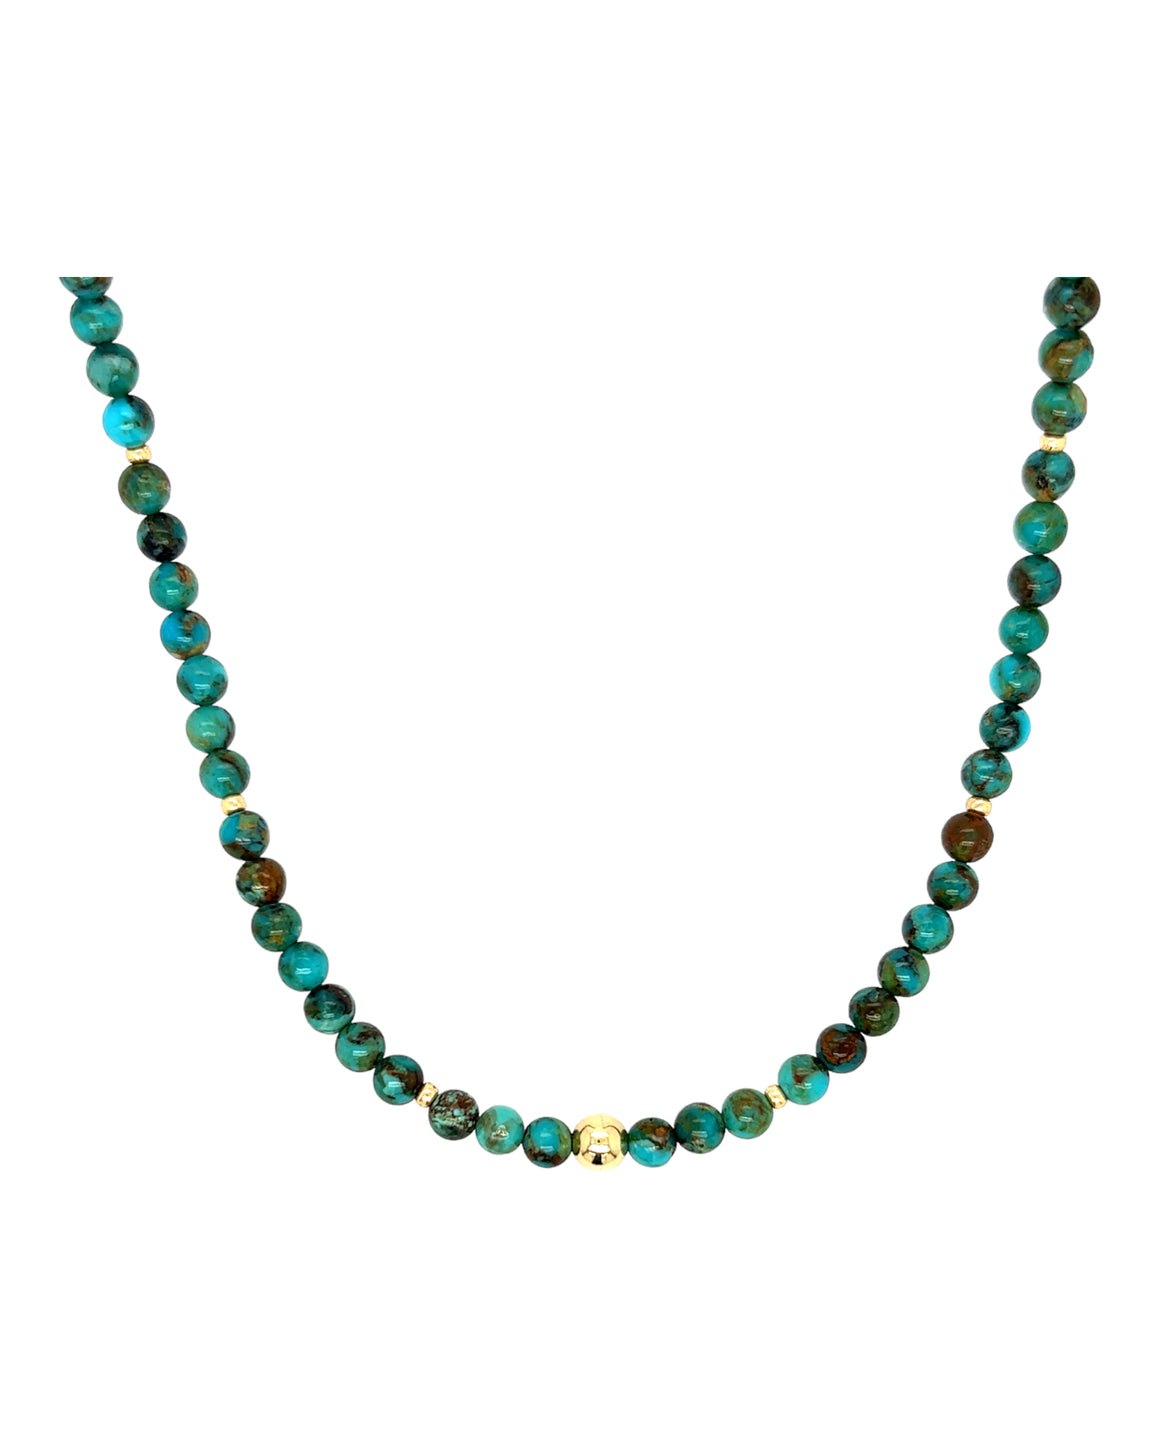 Genuine Turquoise and Gold Necklace